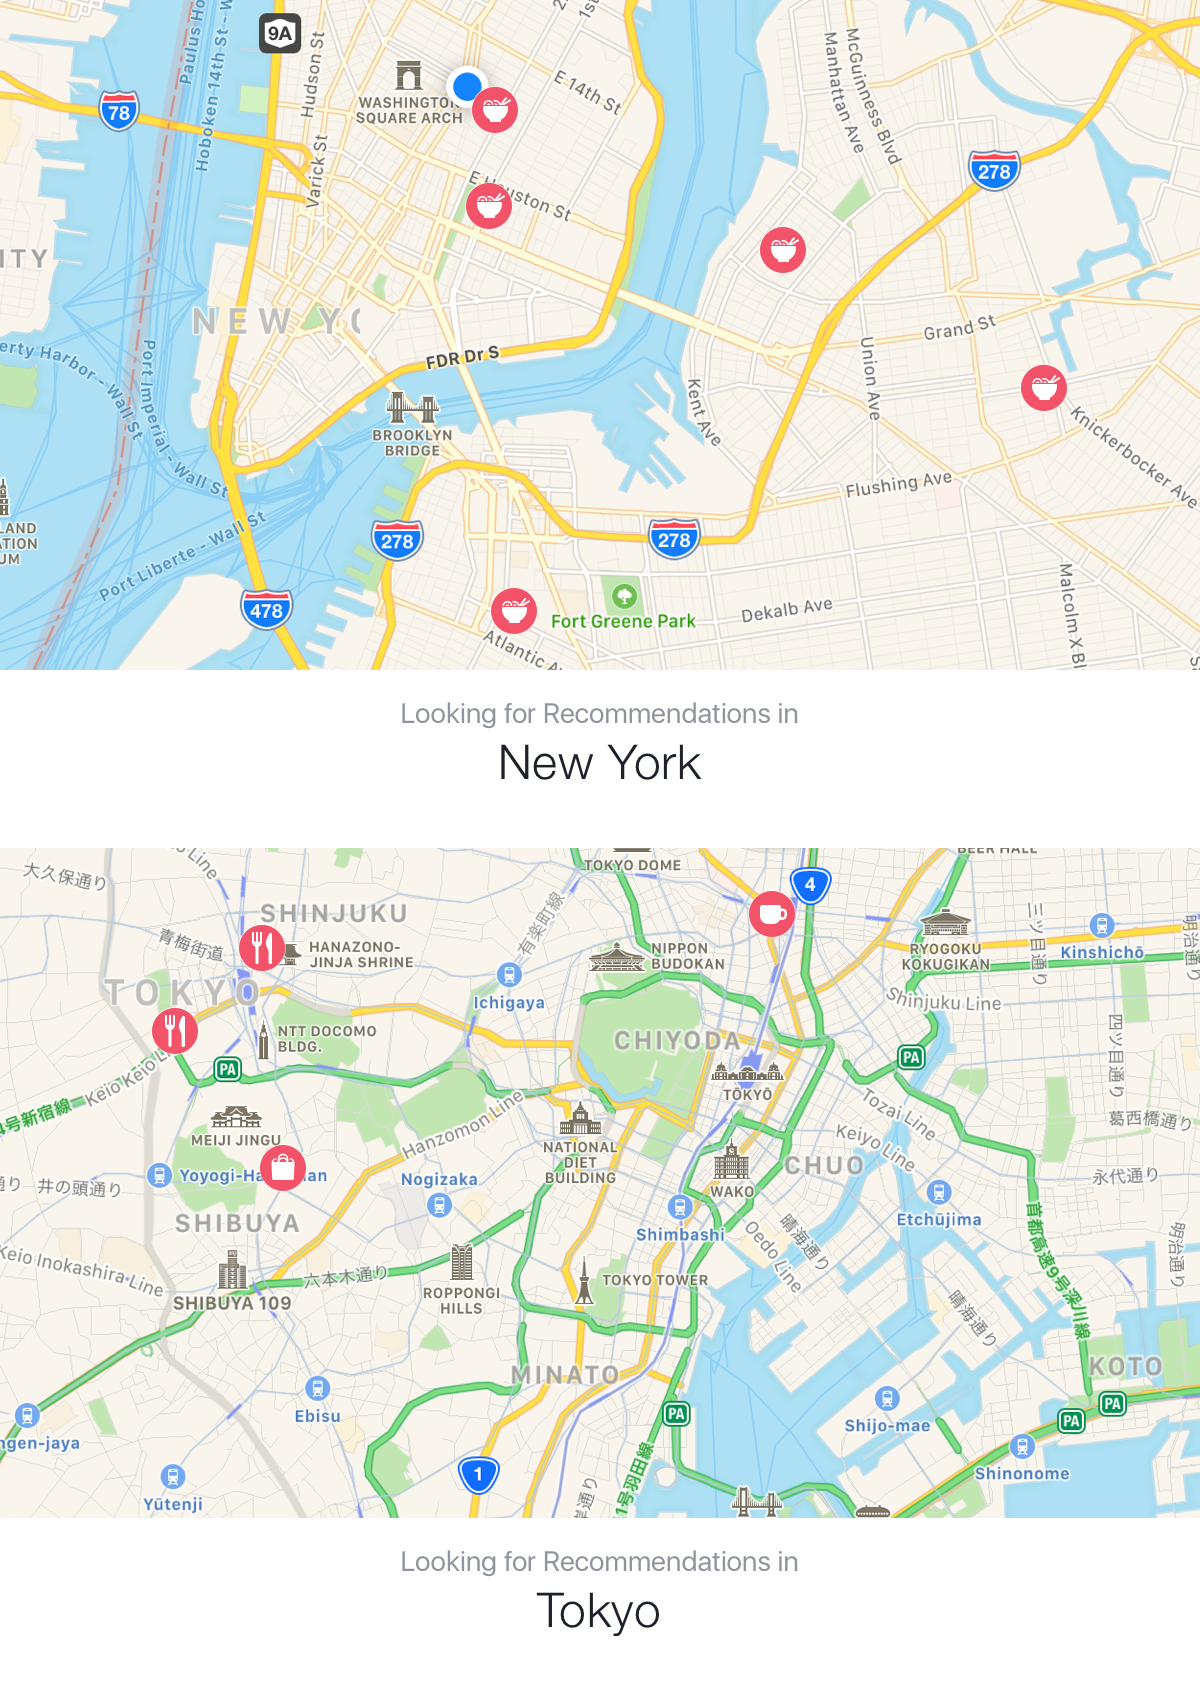 I’ve been meaning to post this for awhile now. One of the first projects I worked on at Facebook was to ship category icons on map pins. Before this, they were plain, tiny pink dots; we kept seeing in research that people didn’t notice our maps or...